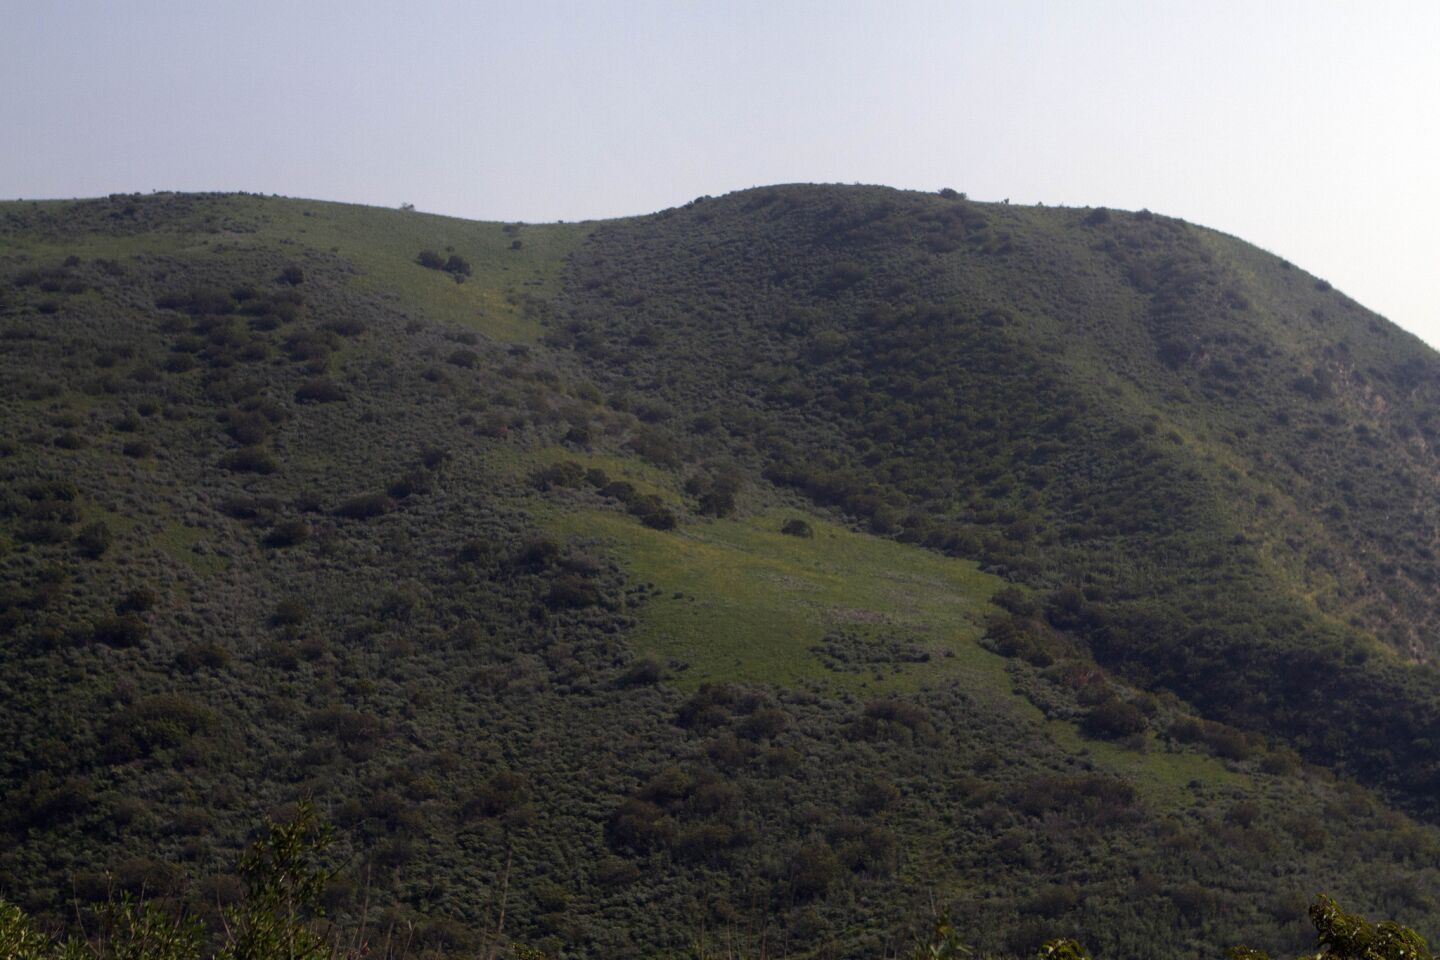 Winter rains have restored the green shade to Solstice Canyon hillsides.